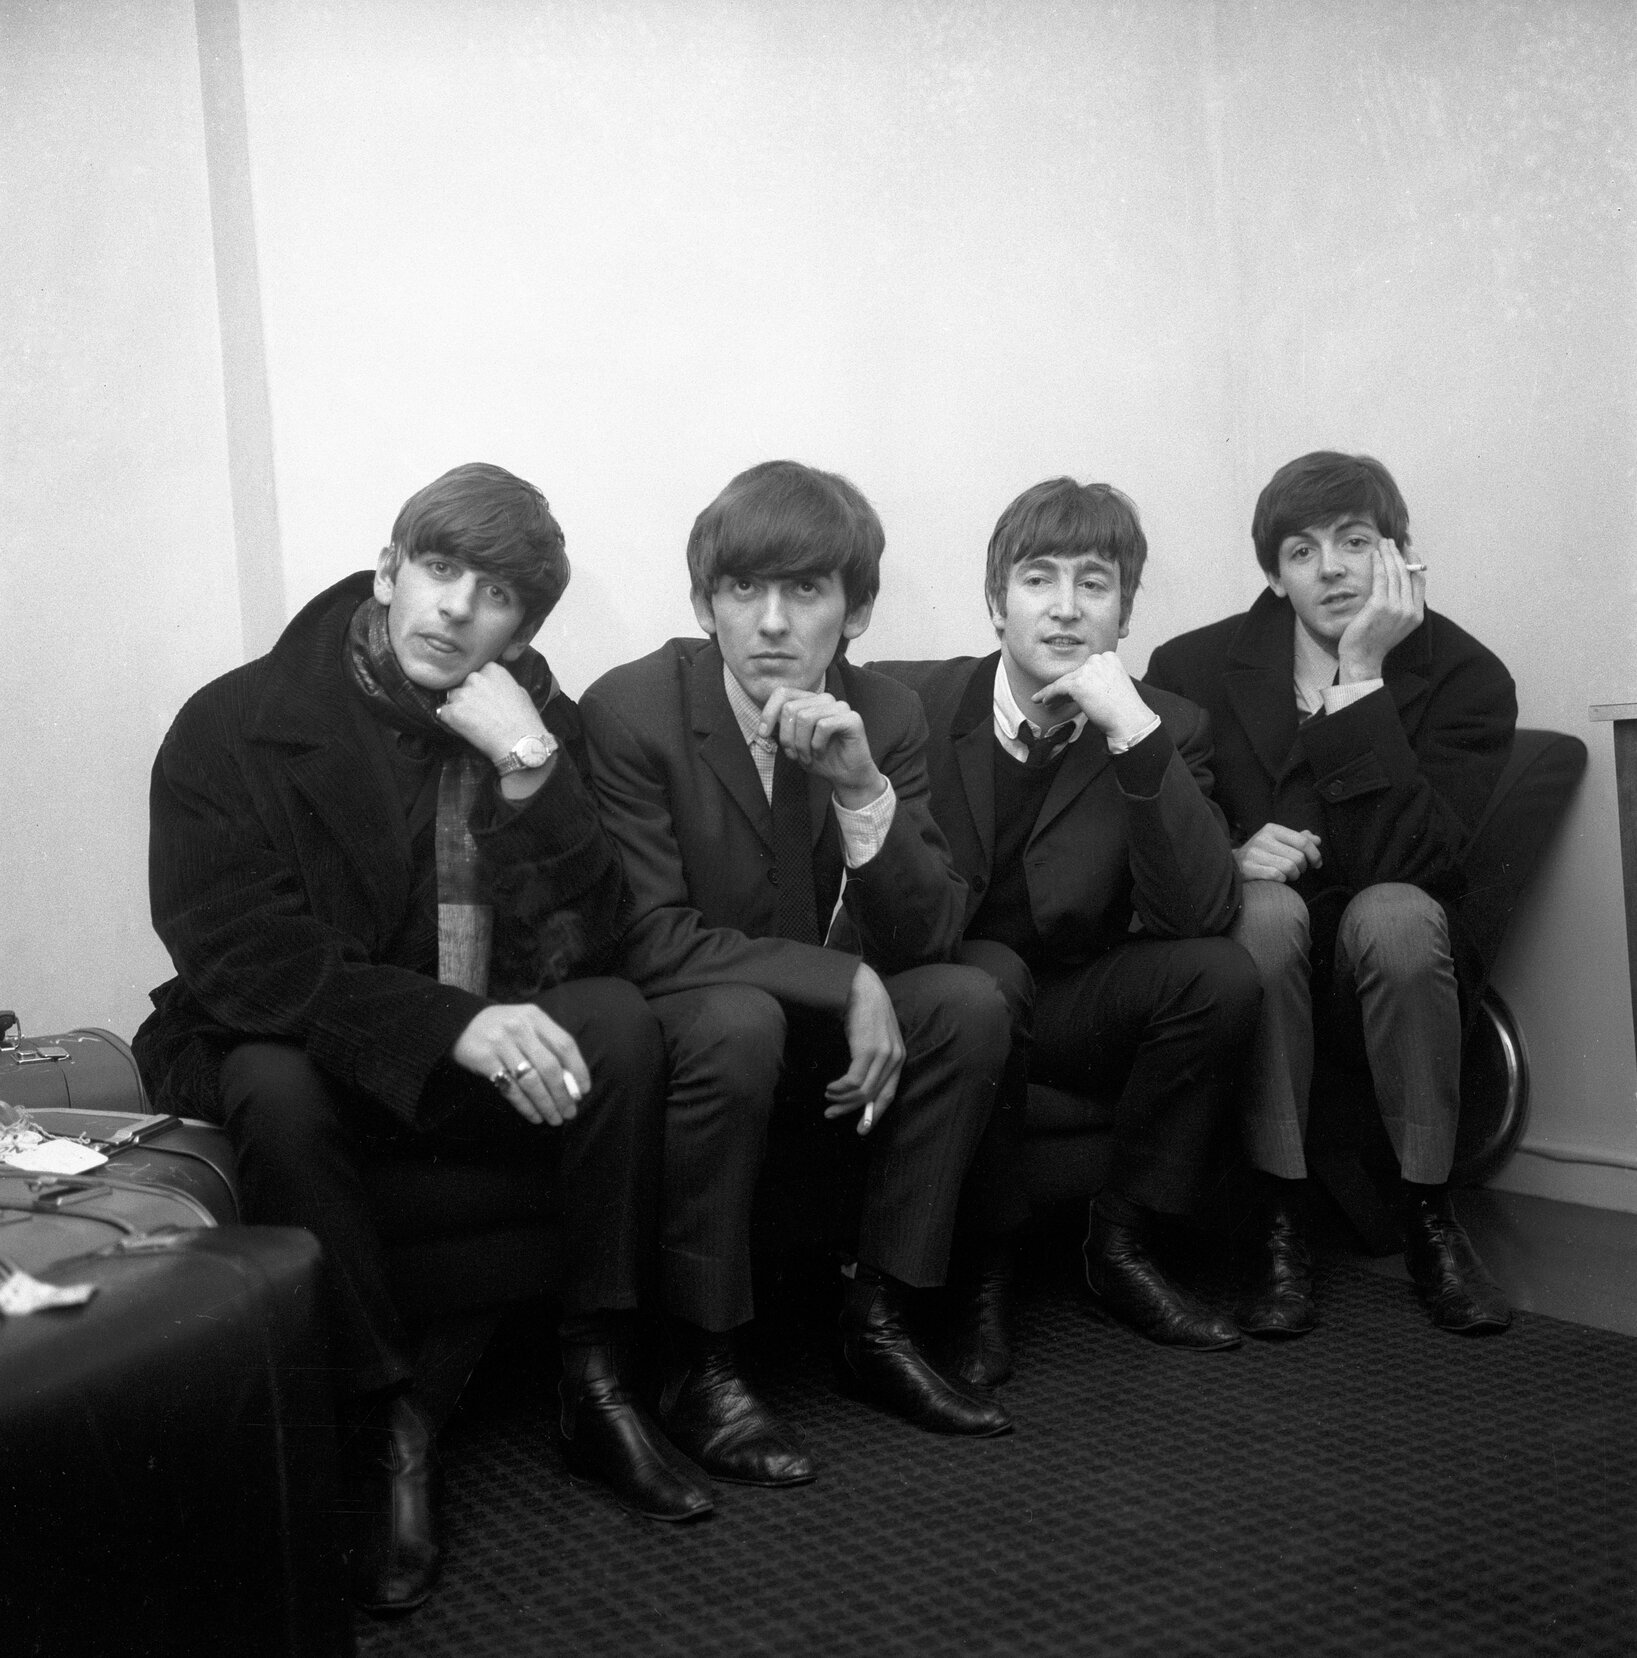 The Beatles, Ringo Starr, George Harrison (1943-2001), John Lennon (1940-1980), and Paul McCartney backstage at Guildhall on December 3, 1963 in Portsmouth, England, United Kingdom